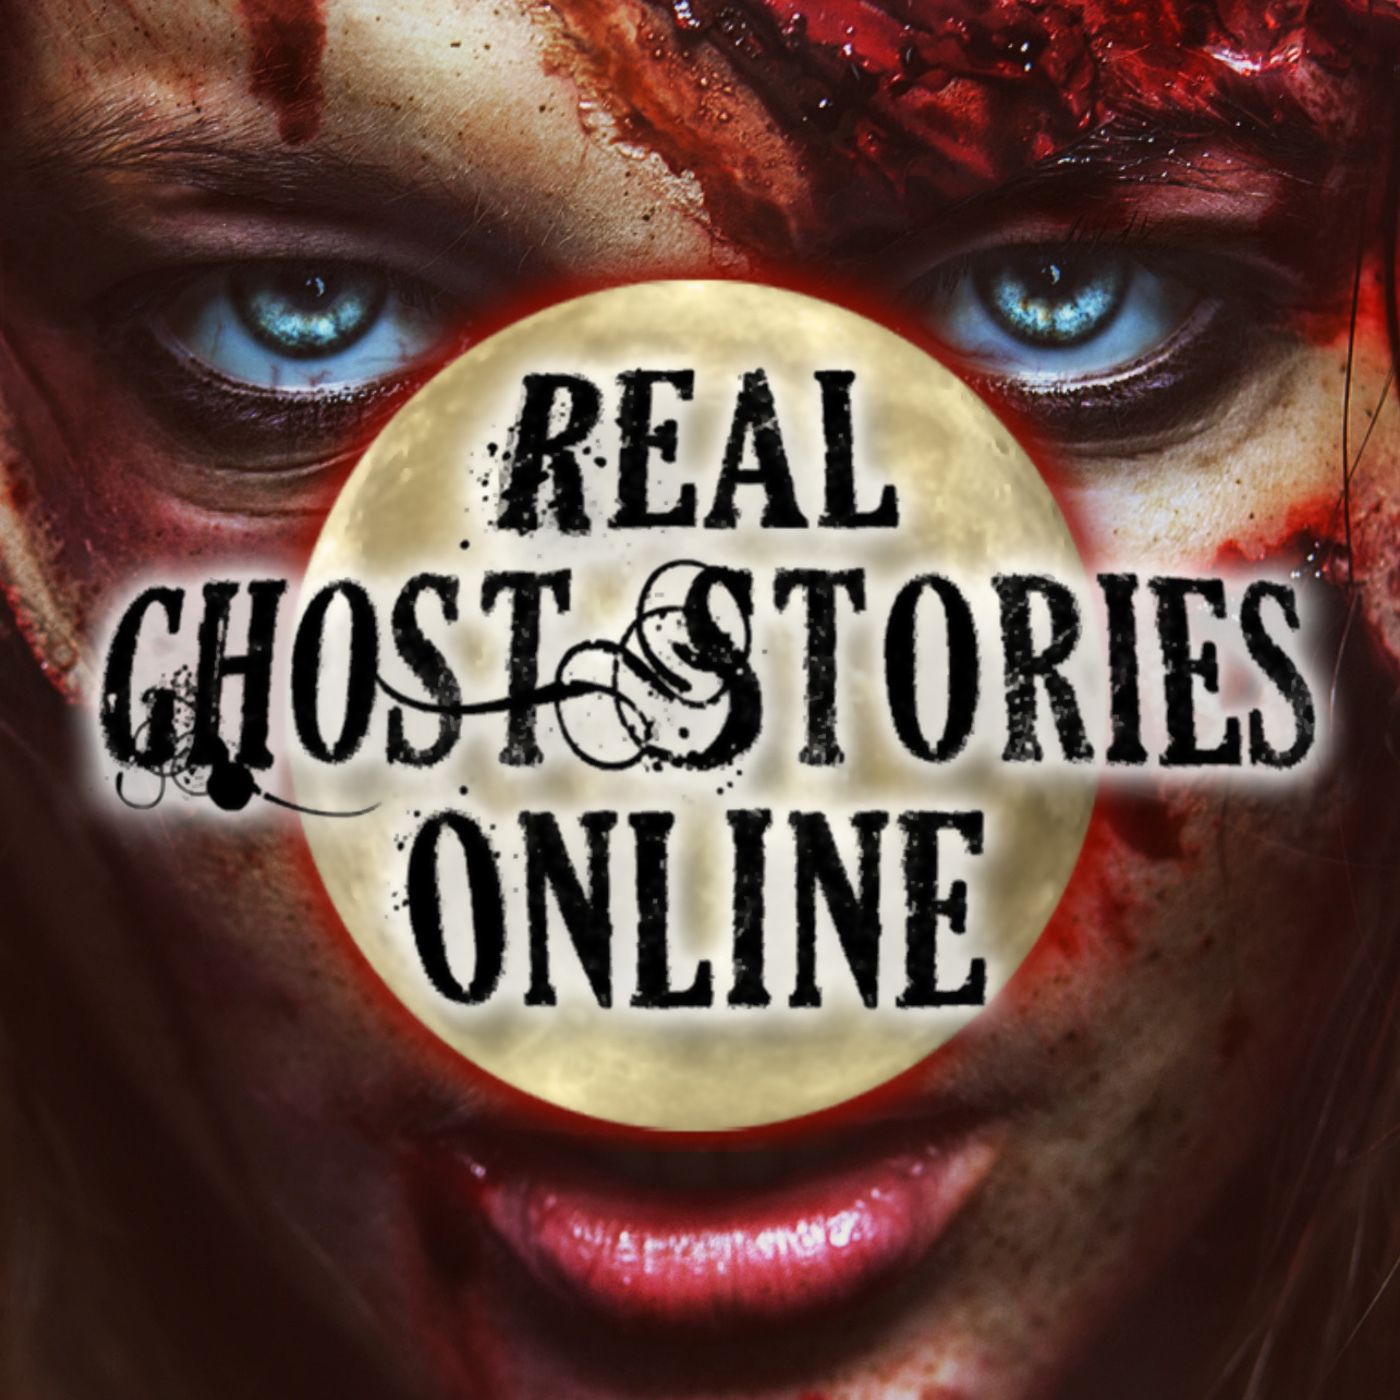 Who Was the Girl with the Long Hair? | Real Ghost Stories Online